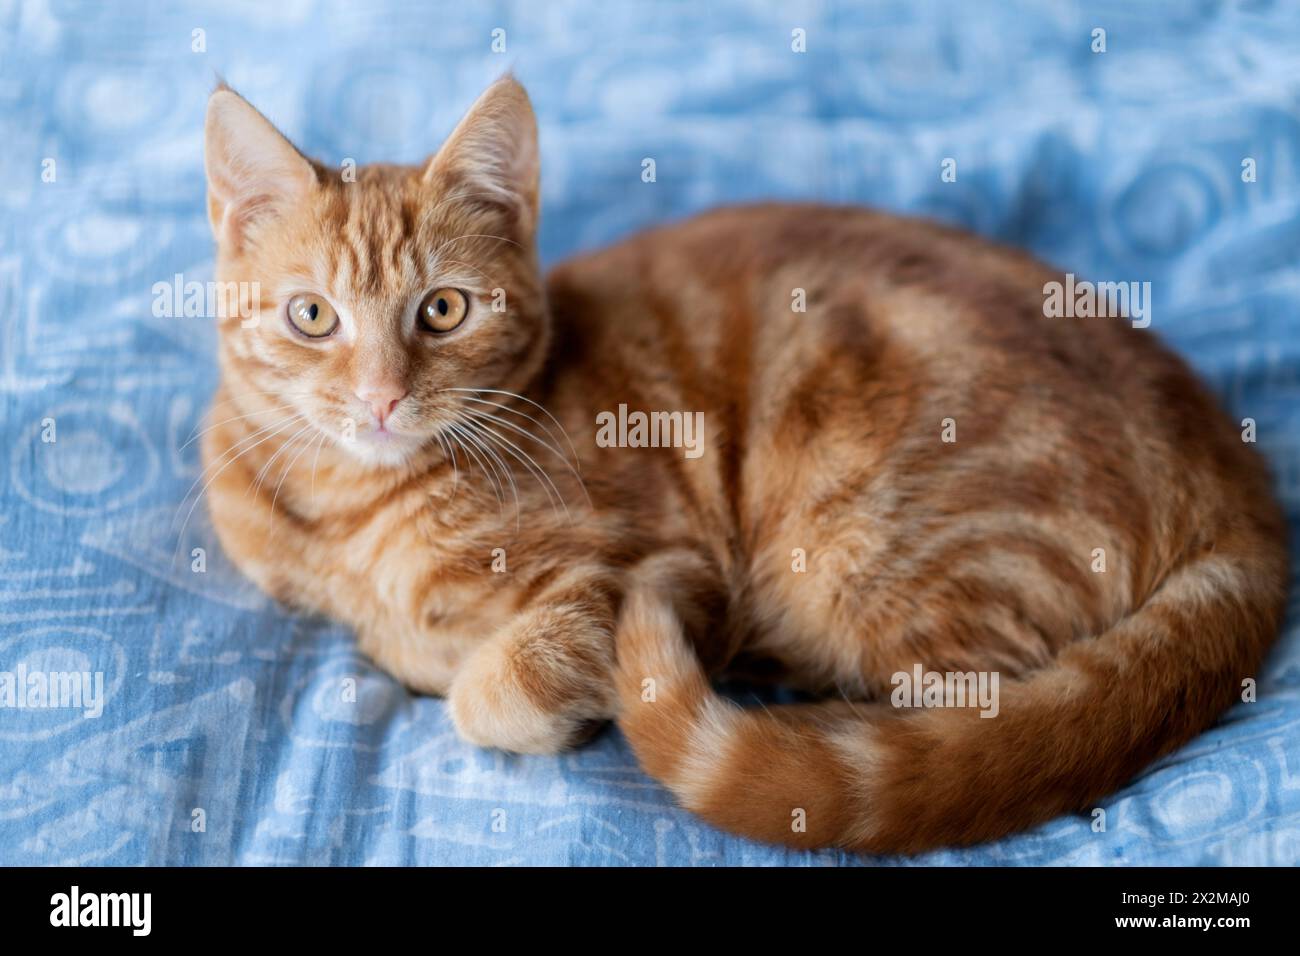 Zoologie / Tiere, Säugetier / Säugetier (Säugetiere), Katze (felidae), ADDITIONAL-RIGHTS-CLEARANCE-INFO-NOT-AVAILABLE Stockfoto